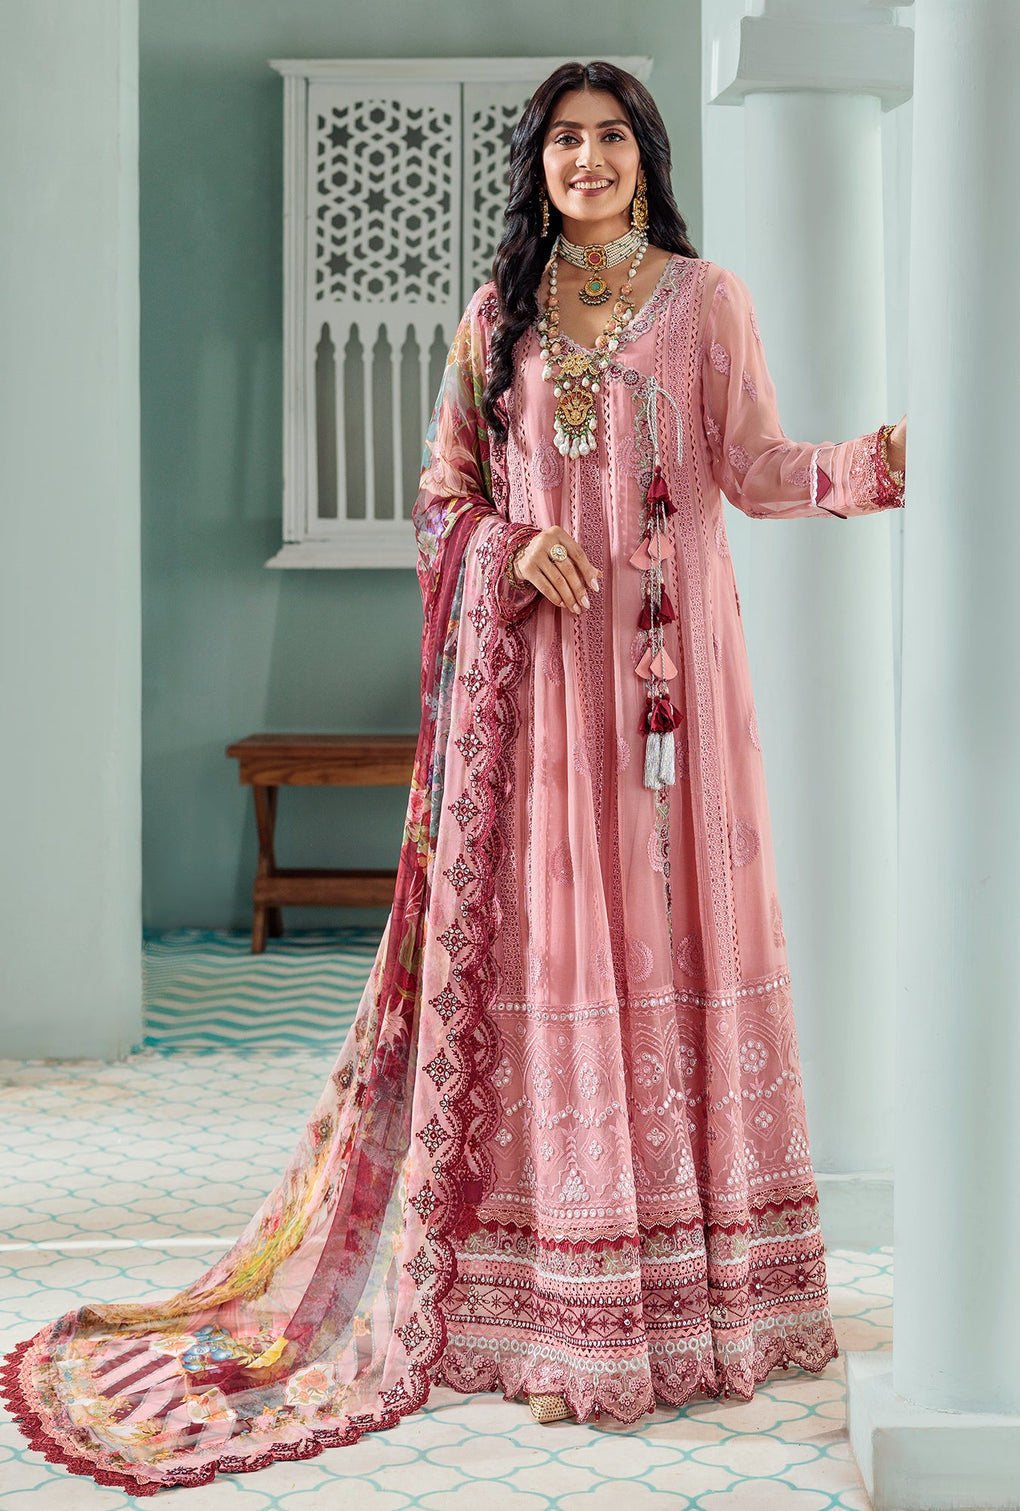 Buy Noor Chiffon Laserkari 2023 by Saadia Asad Lawn Suit from Lebaasonline Largest Pakistani Clothes Stockist in the UK Shop Noor Pakistani Lawn 2023 EID COLLECTION IMROZIA COLLECTION 2023 MUZLIN EID COLLECTION '22 ONLINE UK for Wedding, Party  NIKAH OUTFIT Indian & Pakistani Summer Dresses UK USA UAE DUBAI Manchester 